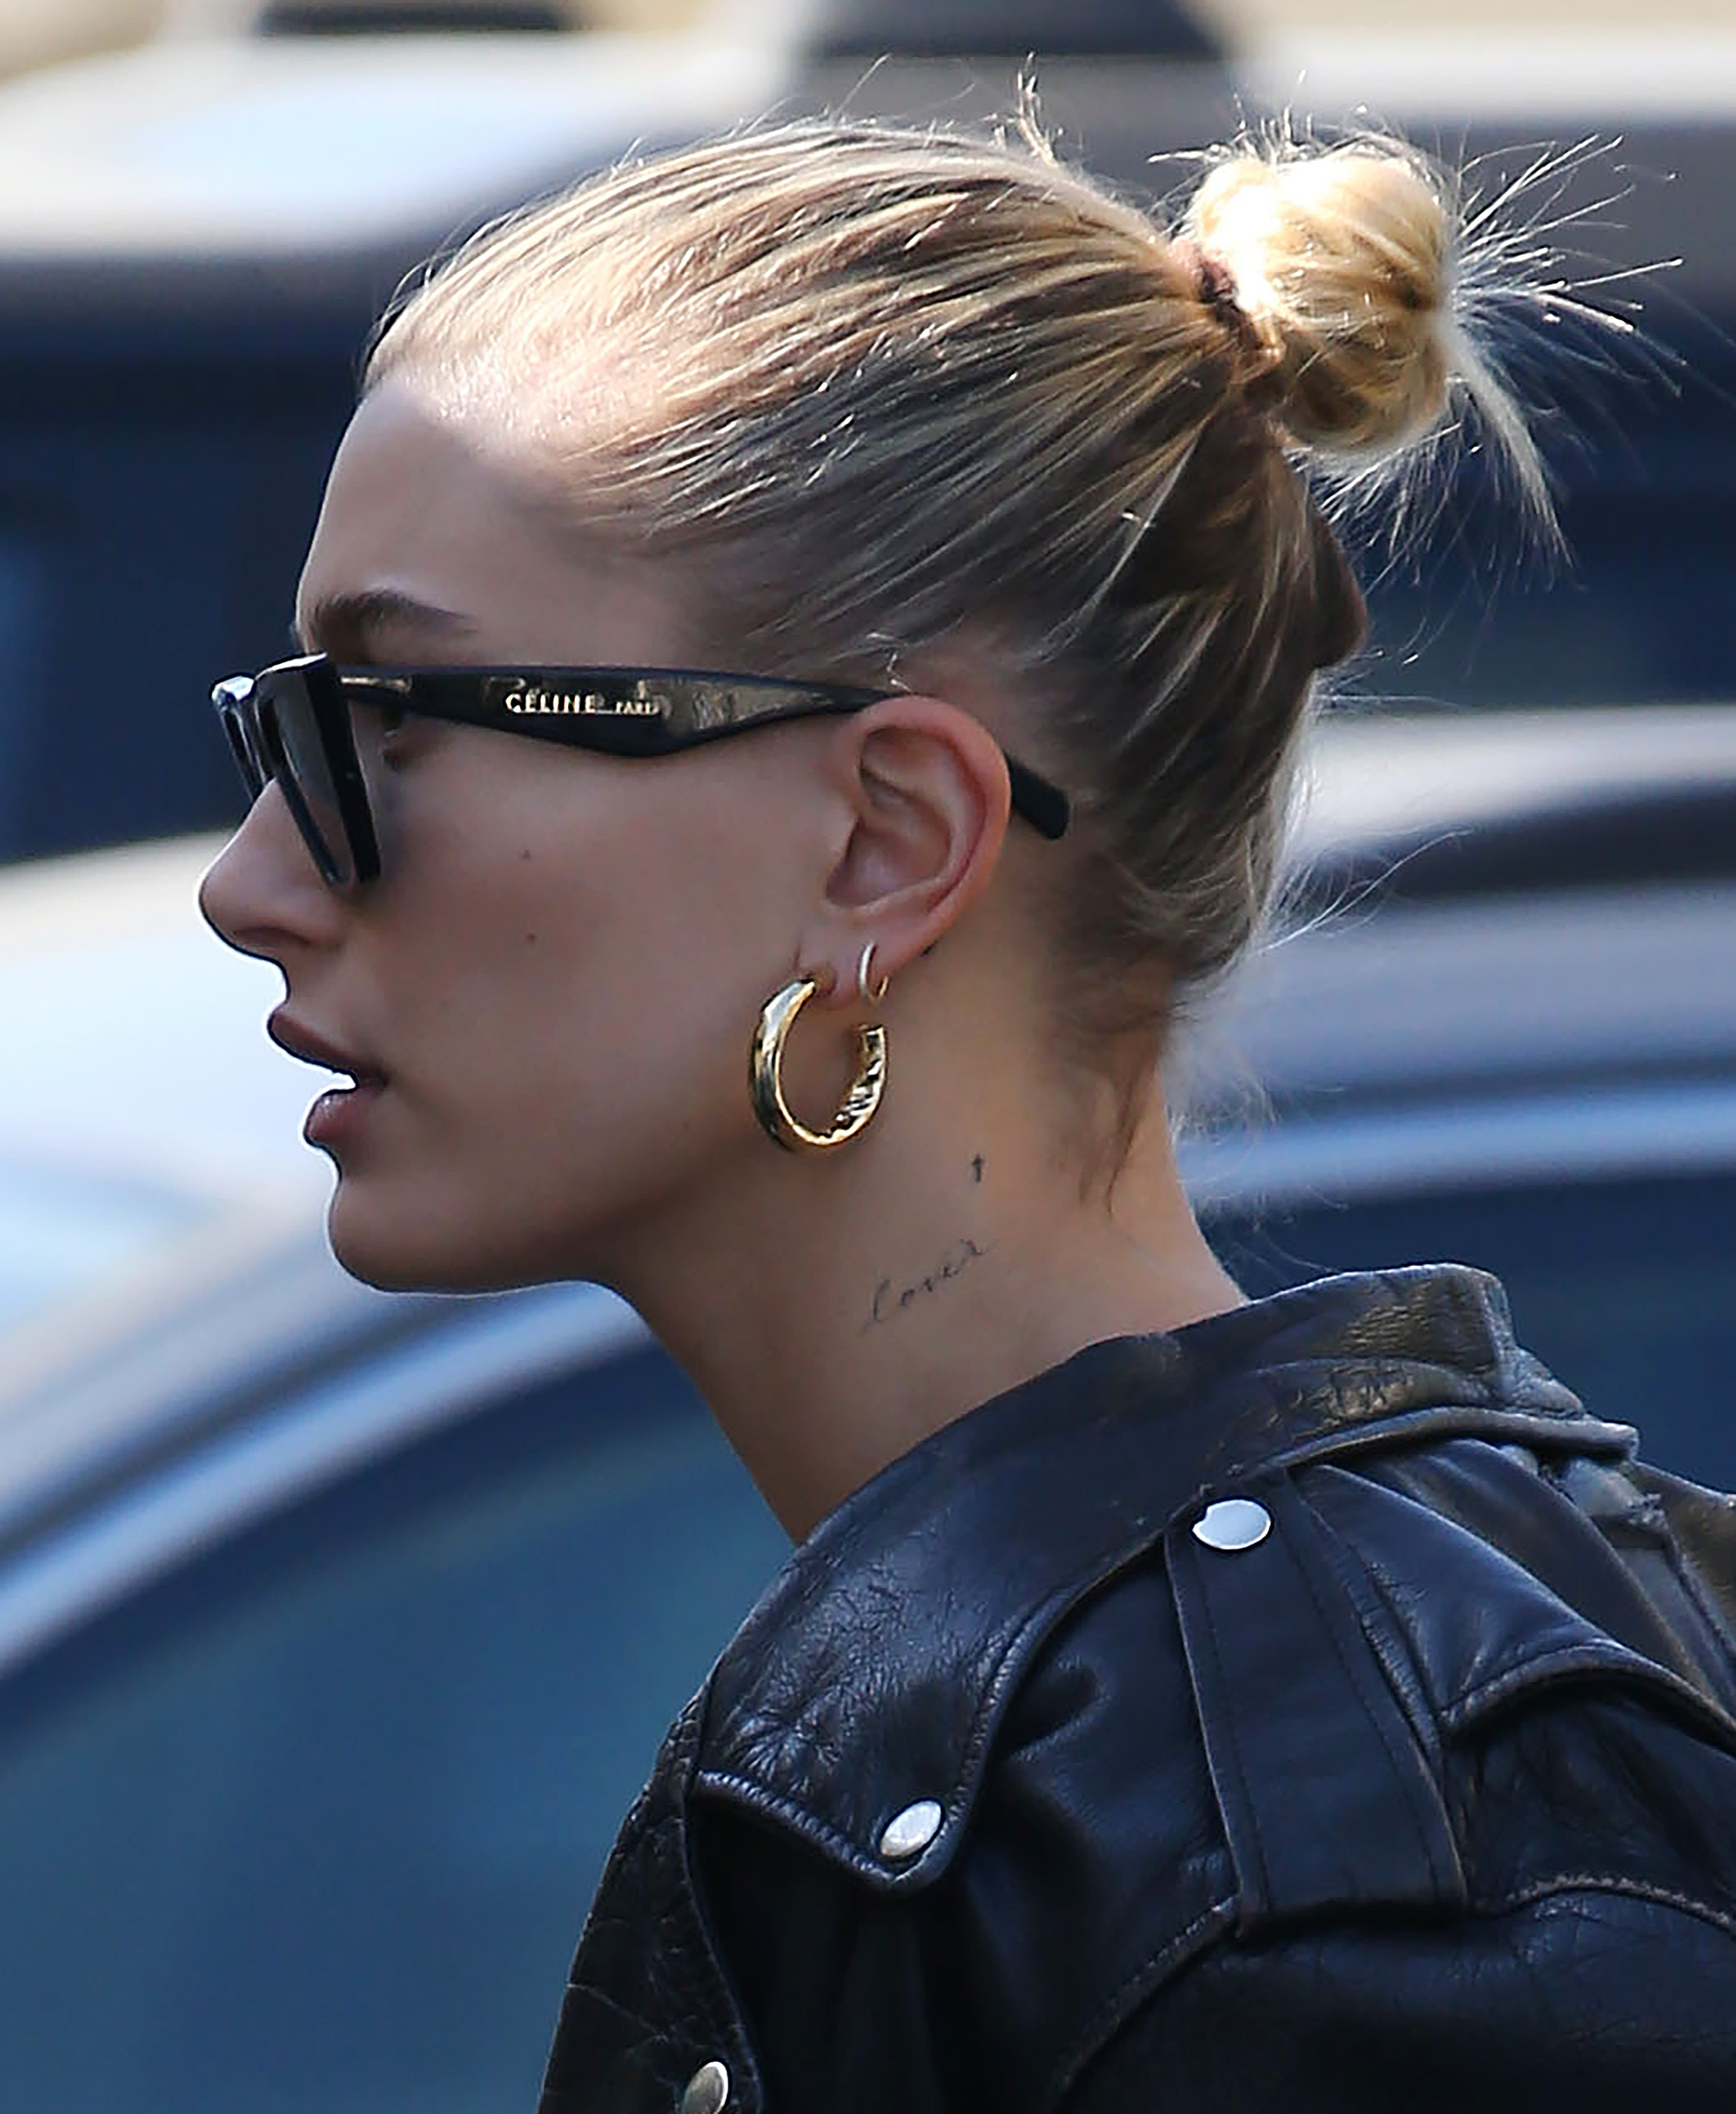 Hailey Baldwin Tattoo Guide: Ink Designs, Meanings, Photos